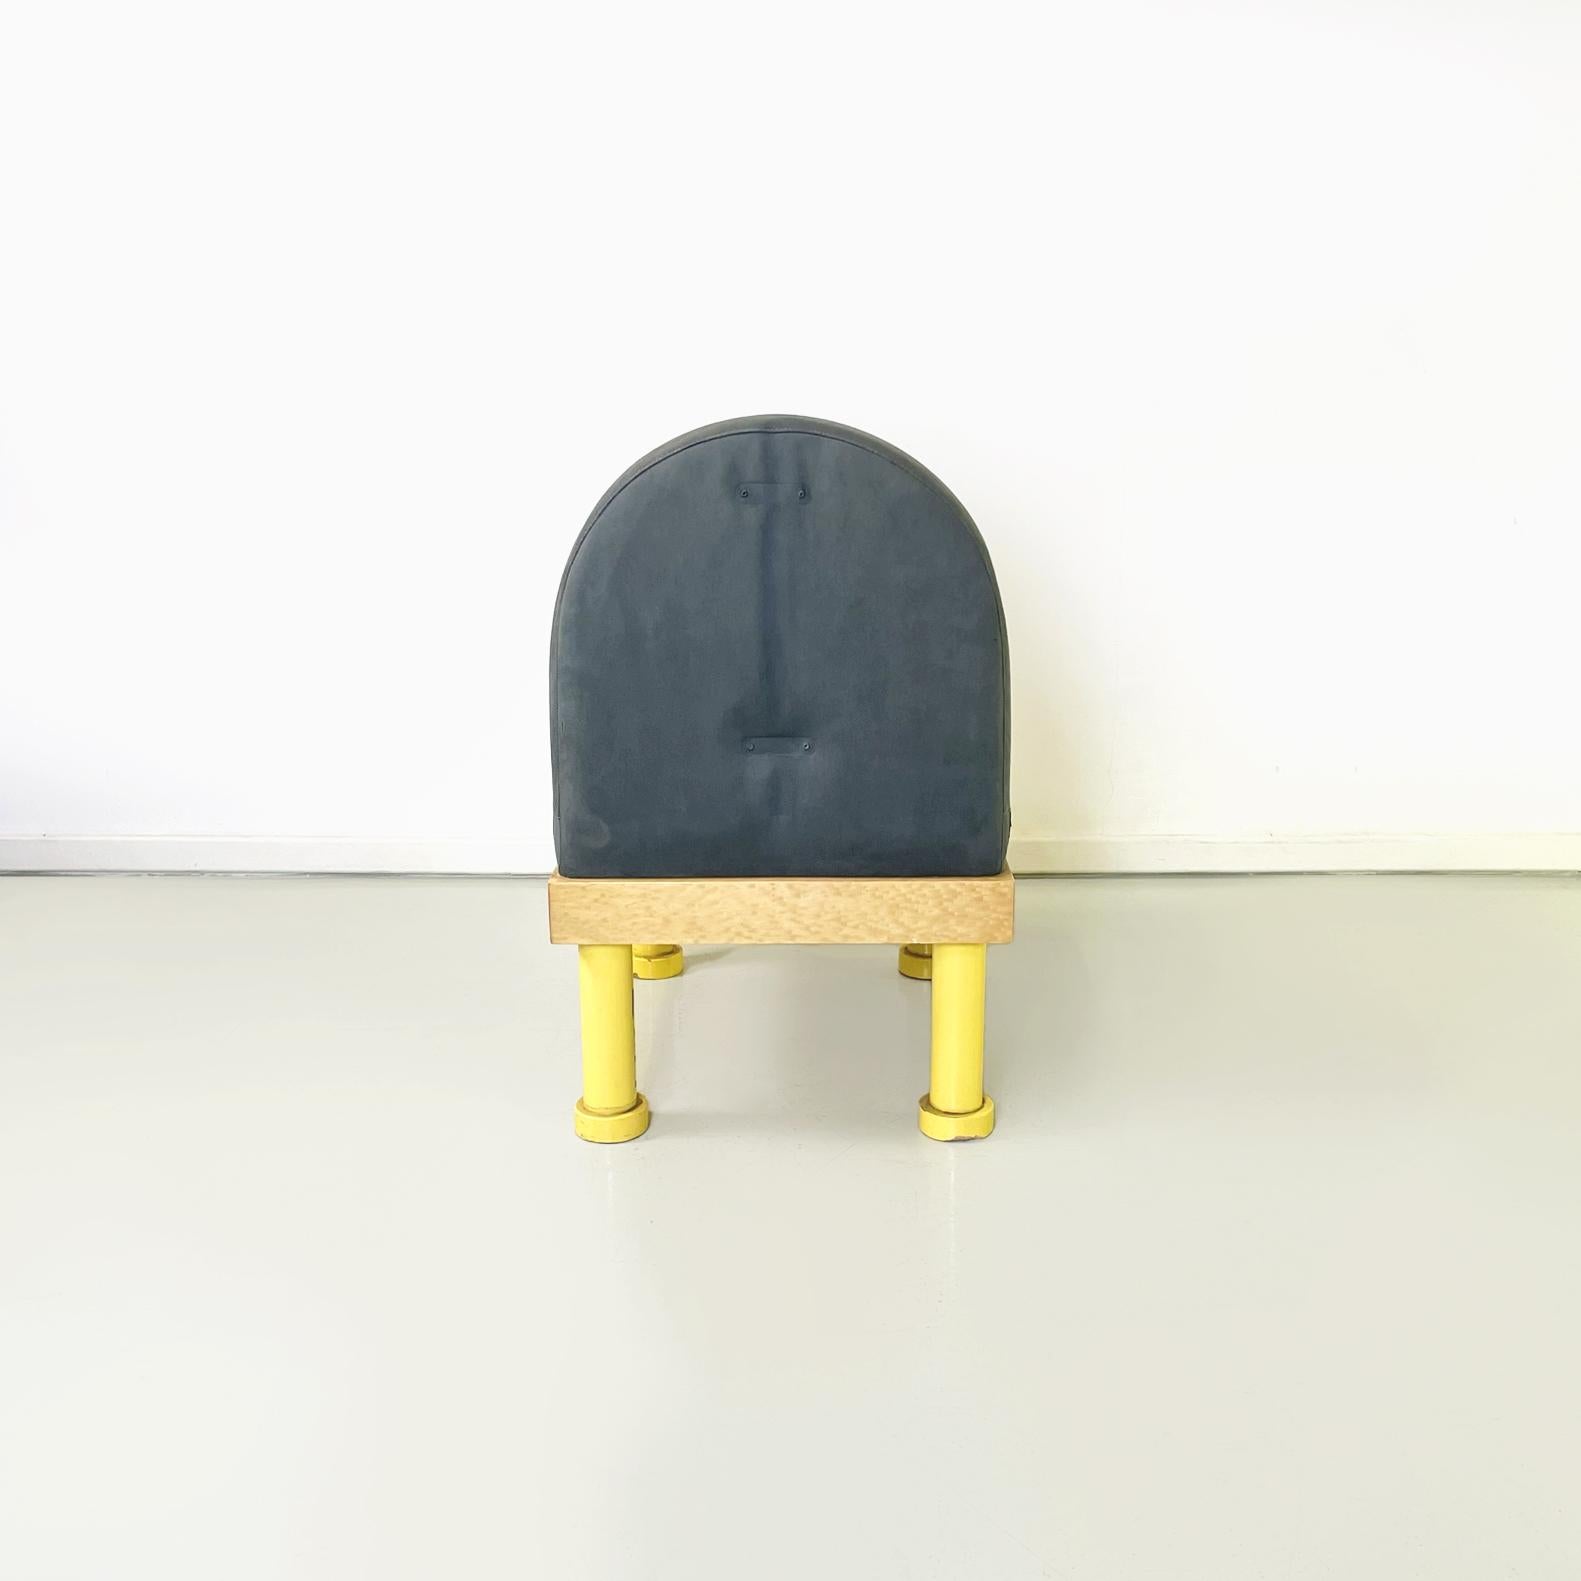 Italian Modern Chair in Gray Velvet, Briar Wood and Yellow Metal, 1980s For Sale 1